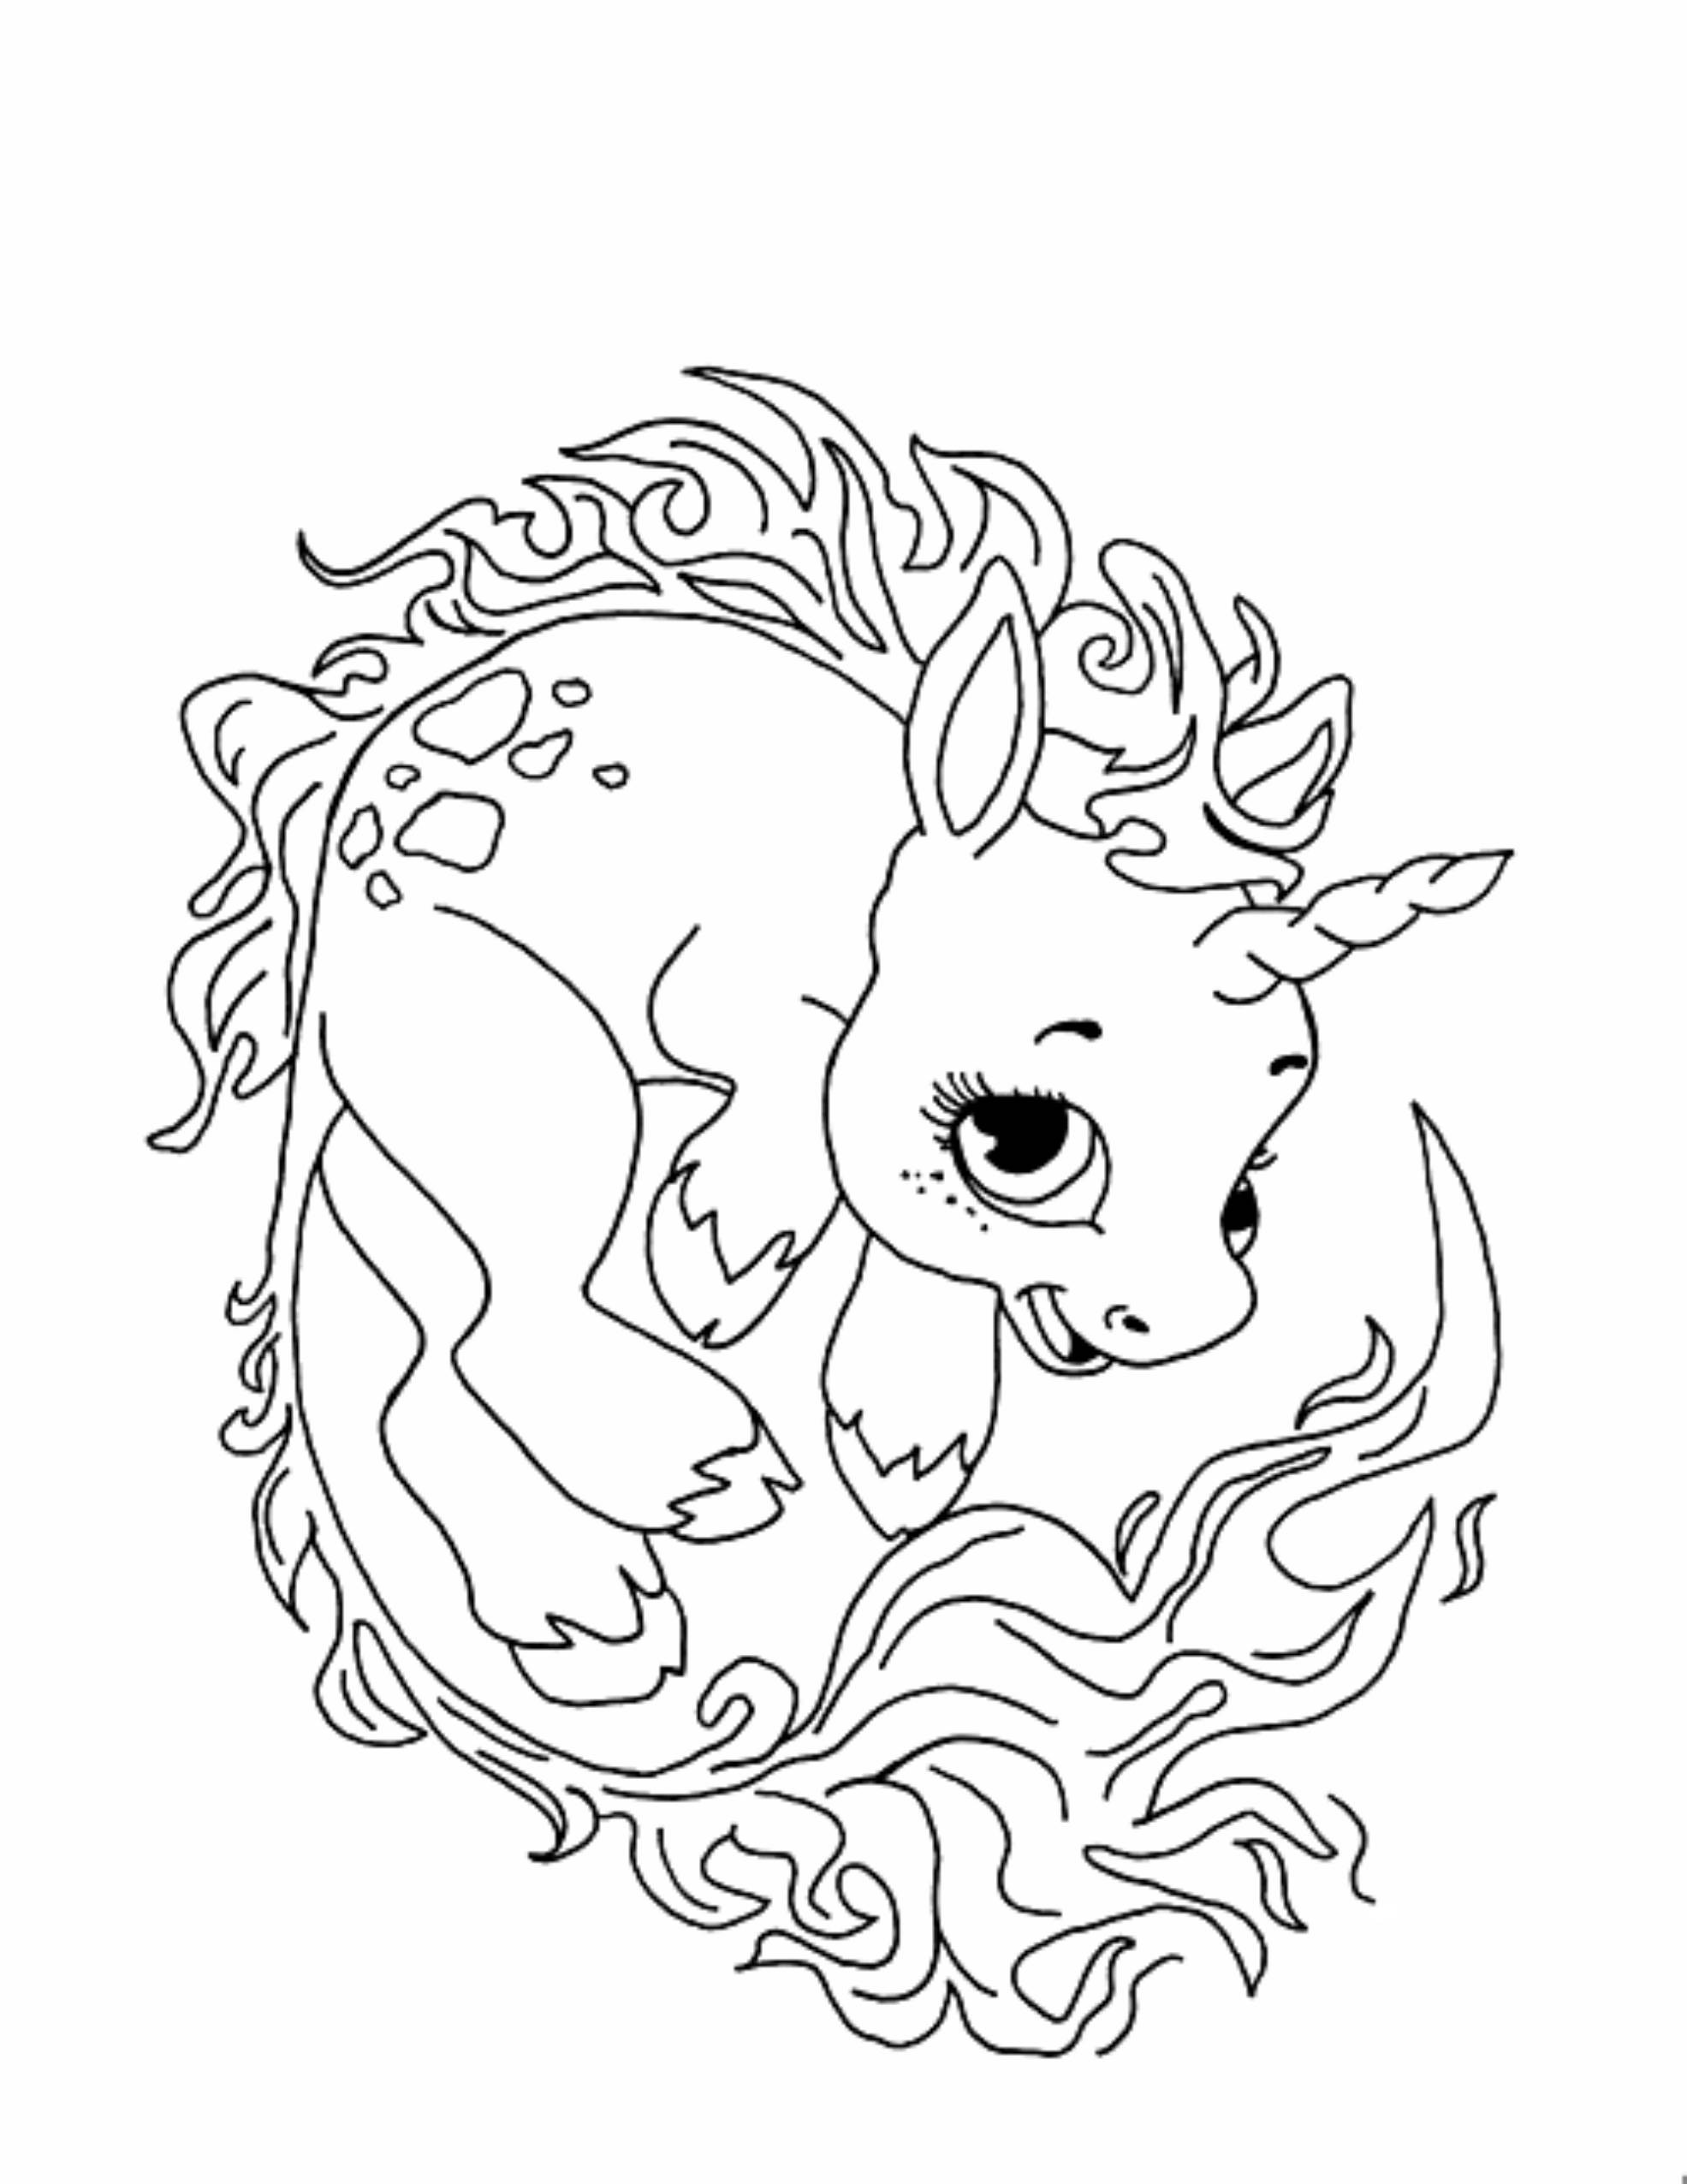 Cute Baby Unicorn Coloring Pages
 6 Pics Cute Unicorn Coloring Pages Cute Baby Unicorn